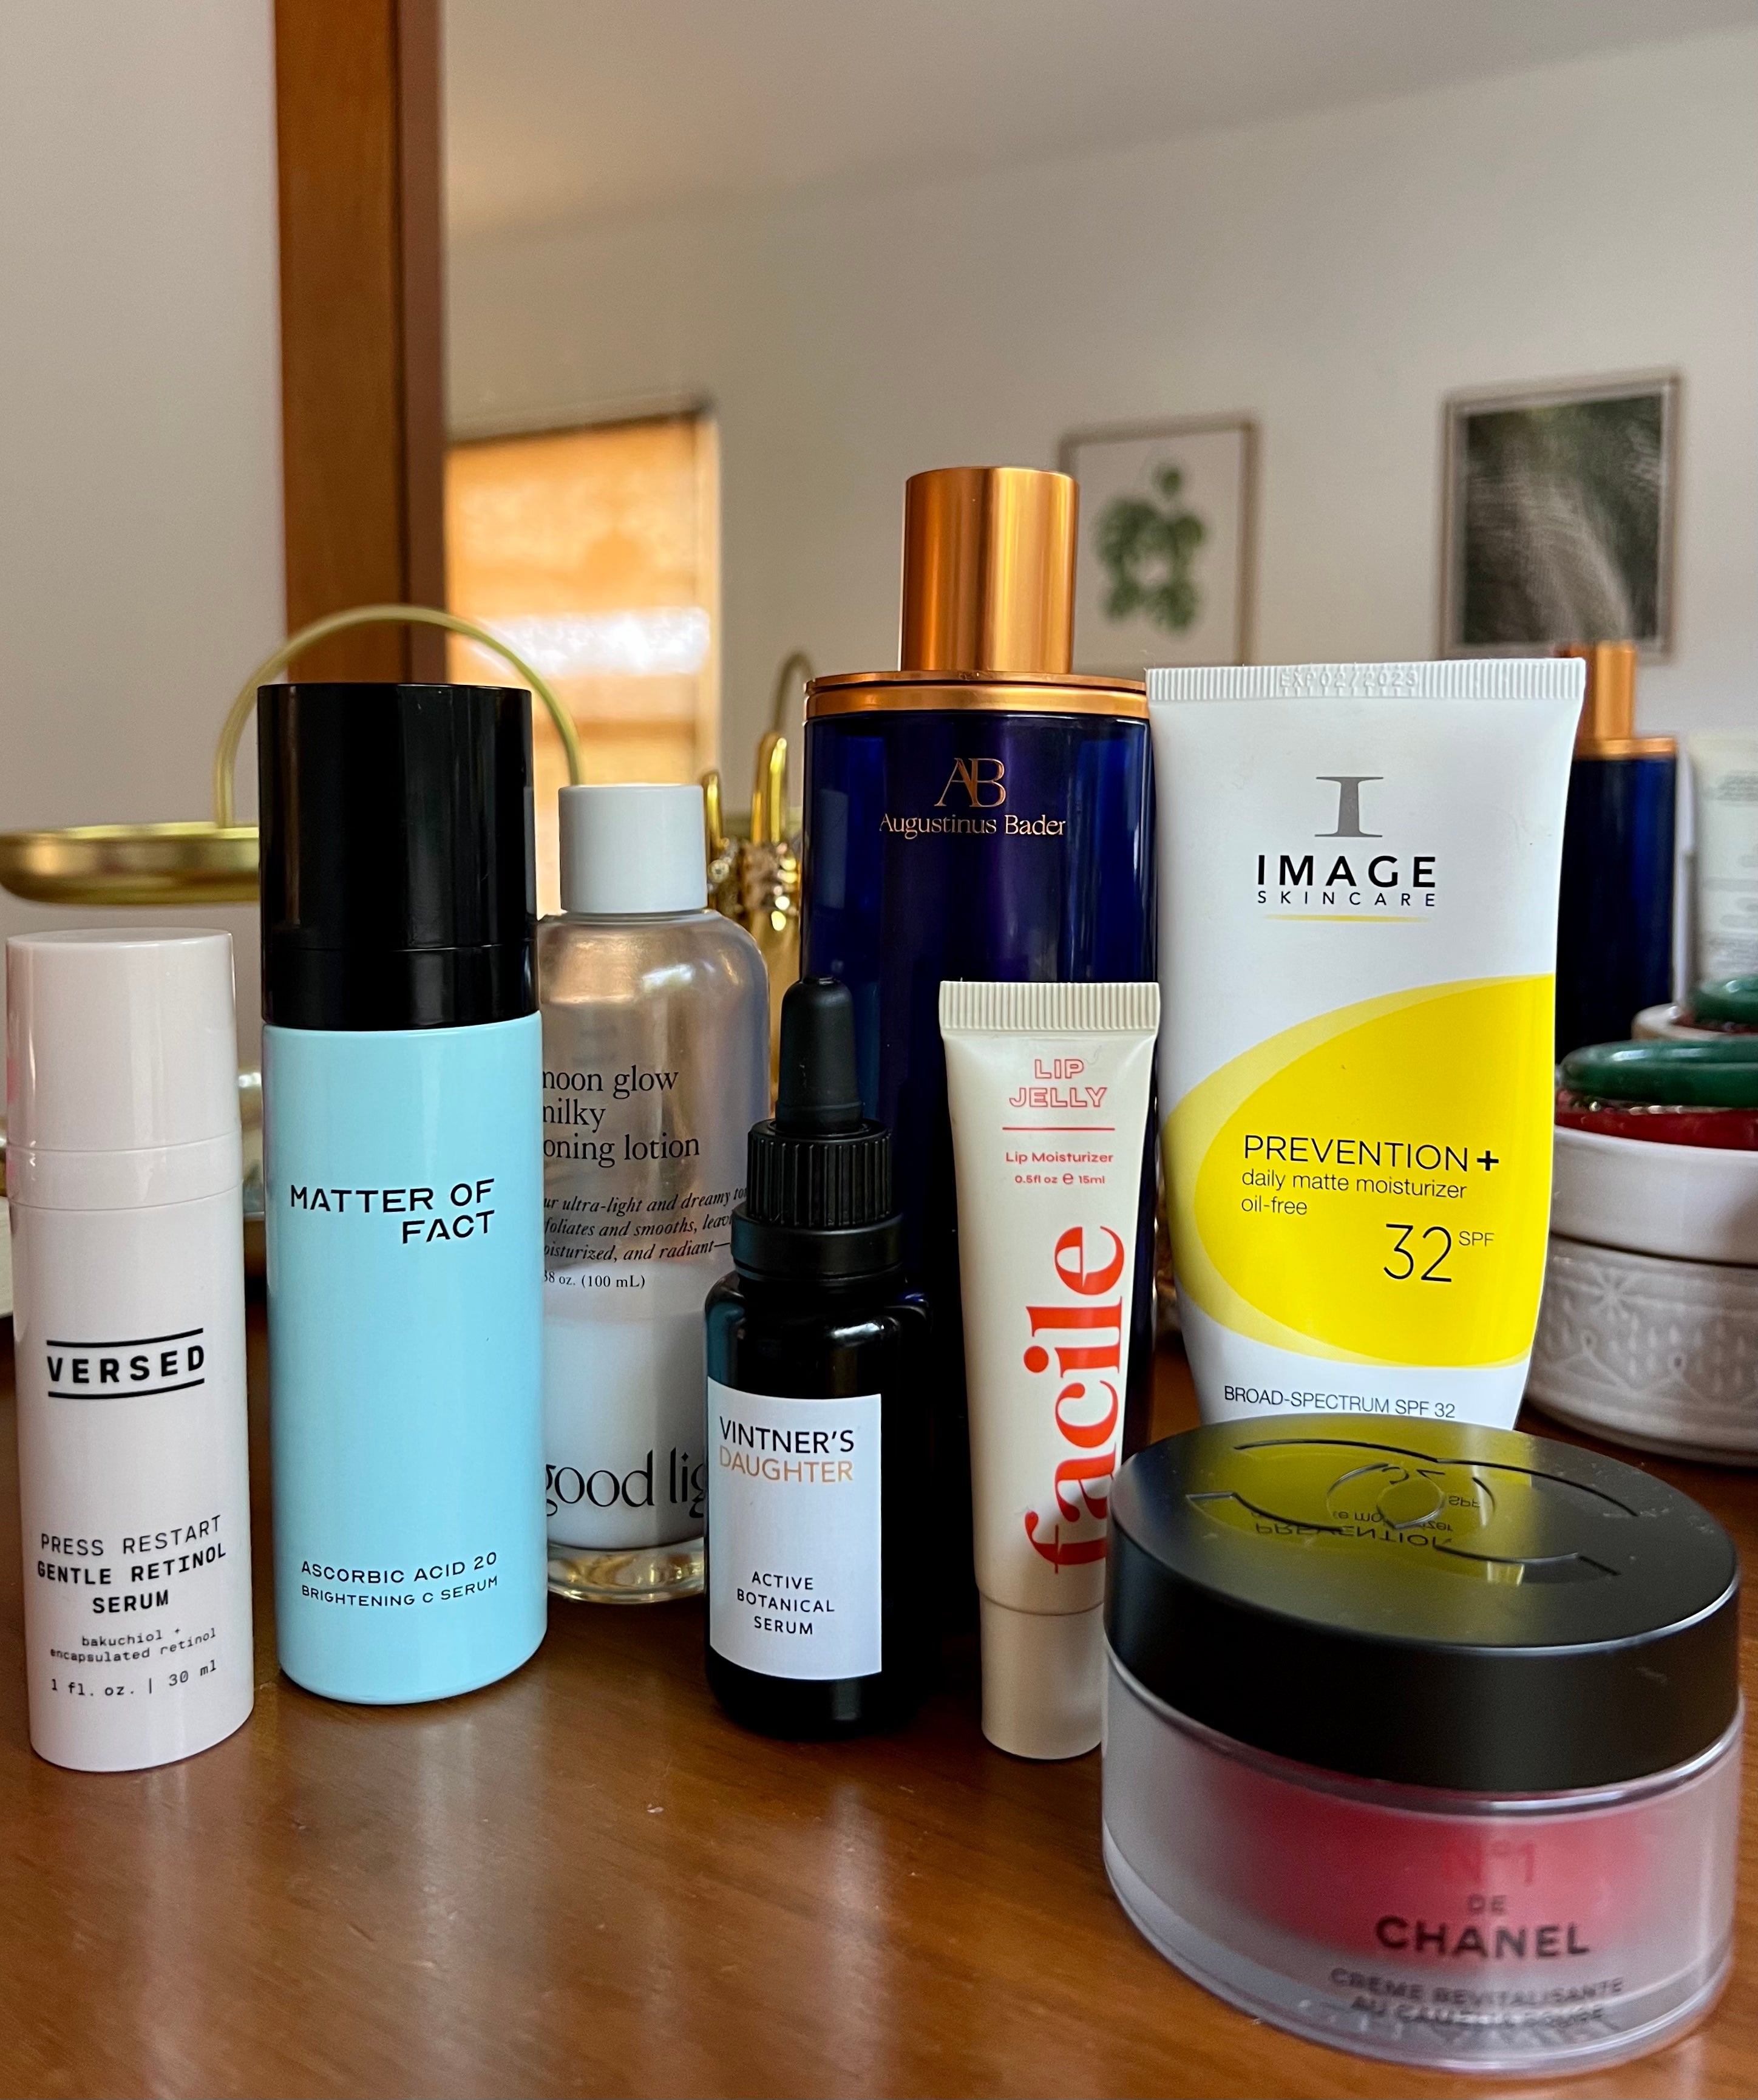 Morning skincare routine with CHANEL & NeoStrata - Lorinda's World